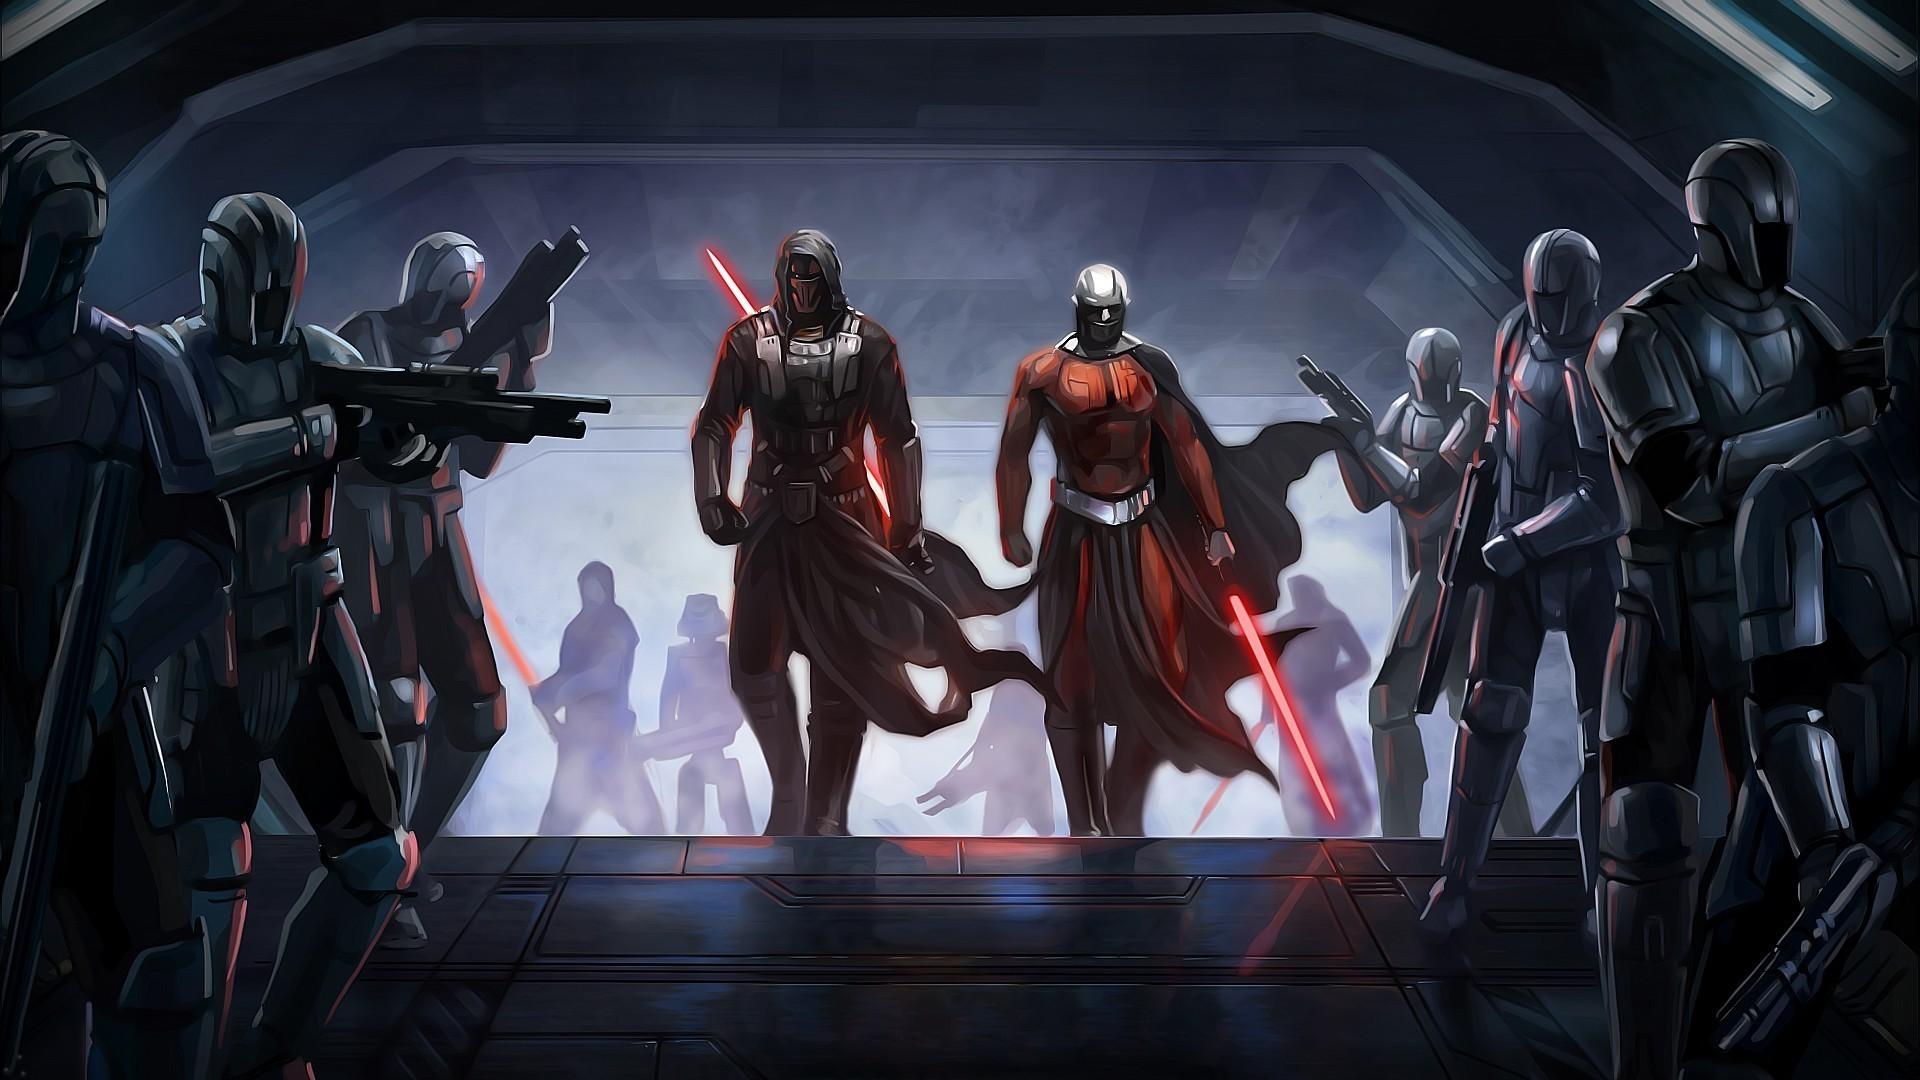 Star Wars: Knights Of The Old Republic Wallpapers - Wallpaper Cave